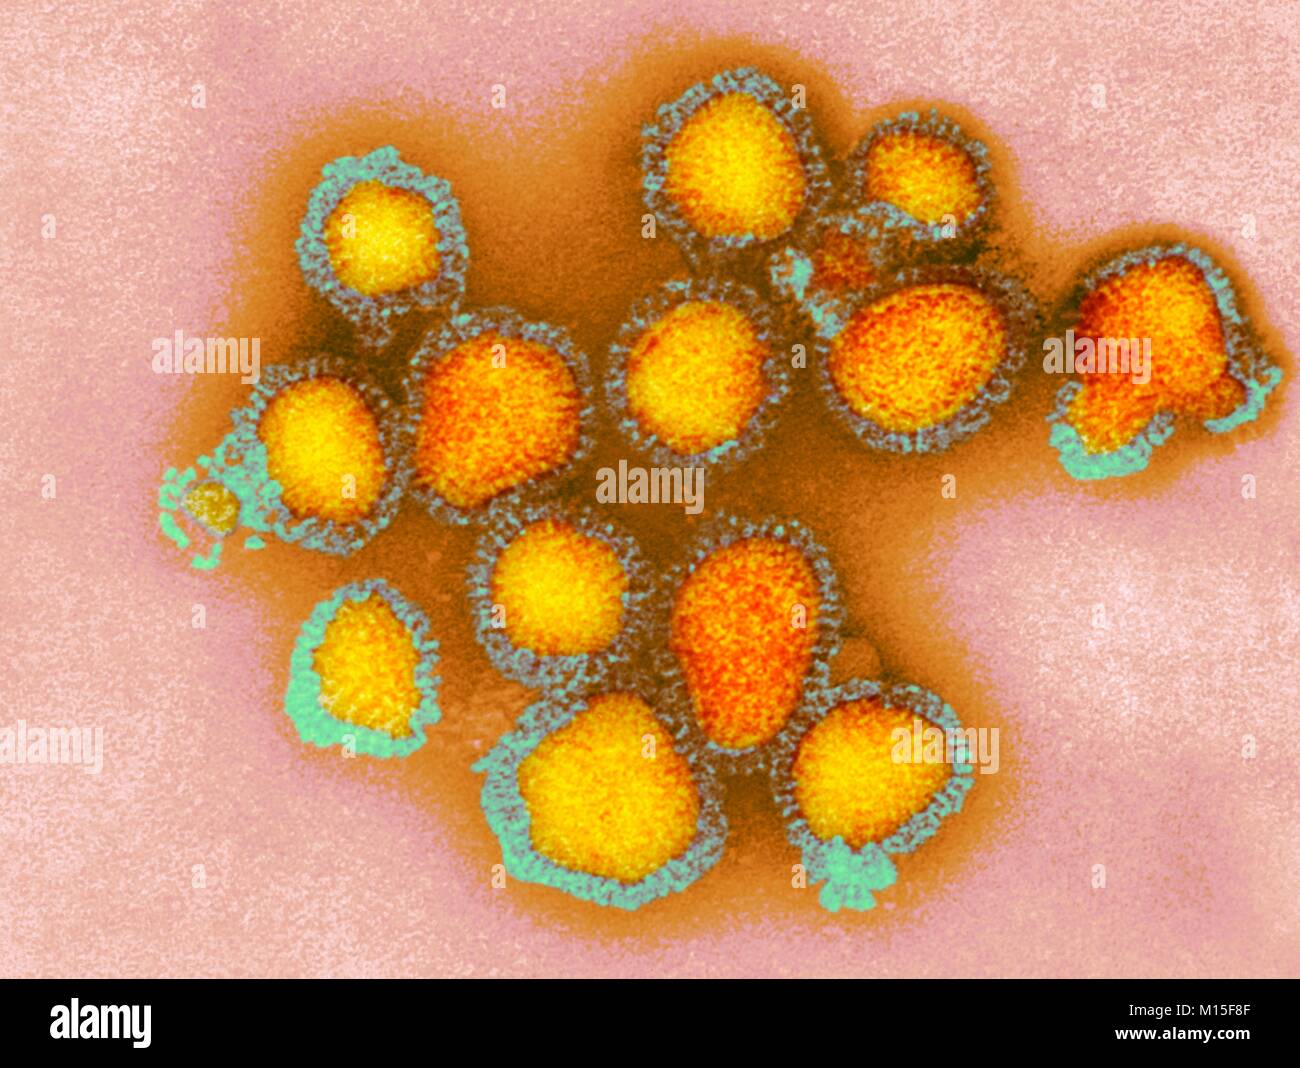 H3N2 influenza virus particles, coloured transmission electron micrograph (TEM). Each virus consists of a nucleocapsid (protein coat) that surrounds a core of RNA (ribonucleic acid) genetic material. Surrounding the nucleocapsid is a lipid envelope that contains the glycoprotein spikes haemagglutinin (H) and neuraminidase (N). These viruses were part of the Hong Kong Flu pandemic of 1968-1969 that killed approximately one million worldwide. H3N2 viruses are able to infect birds and mammals as well as humans. Stock Photo